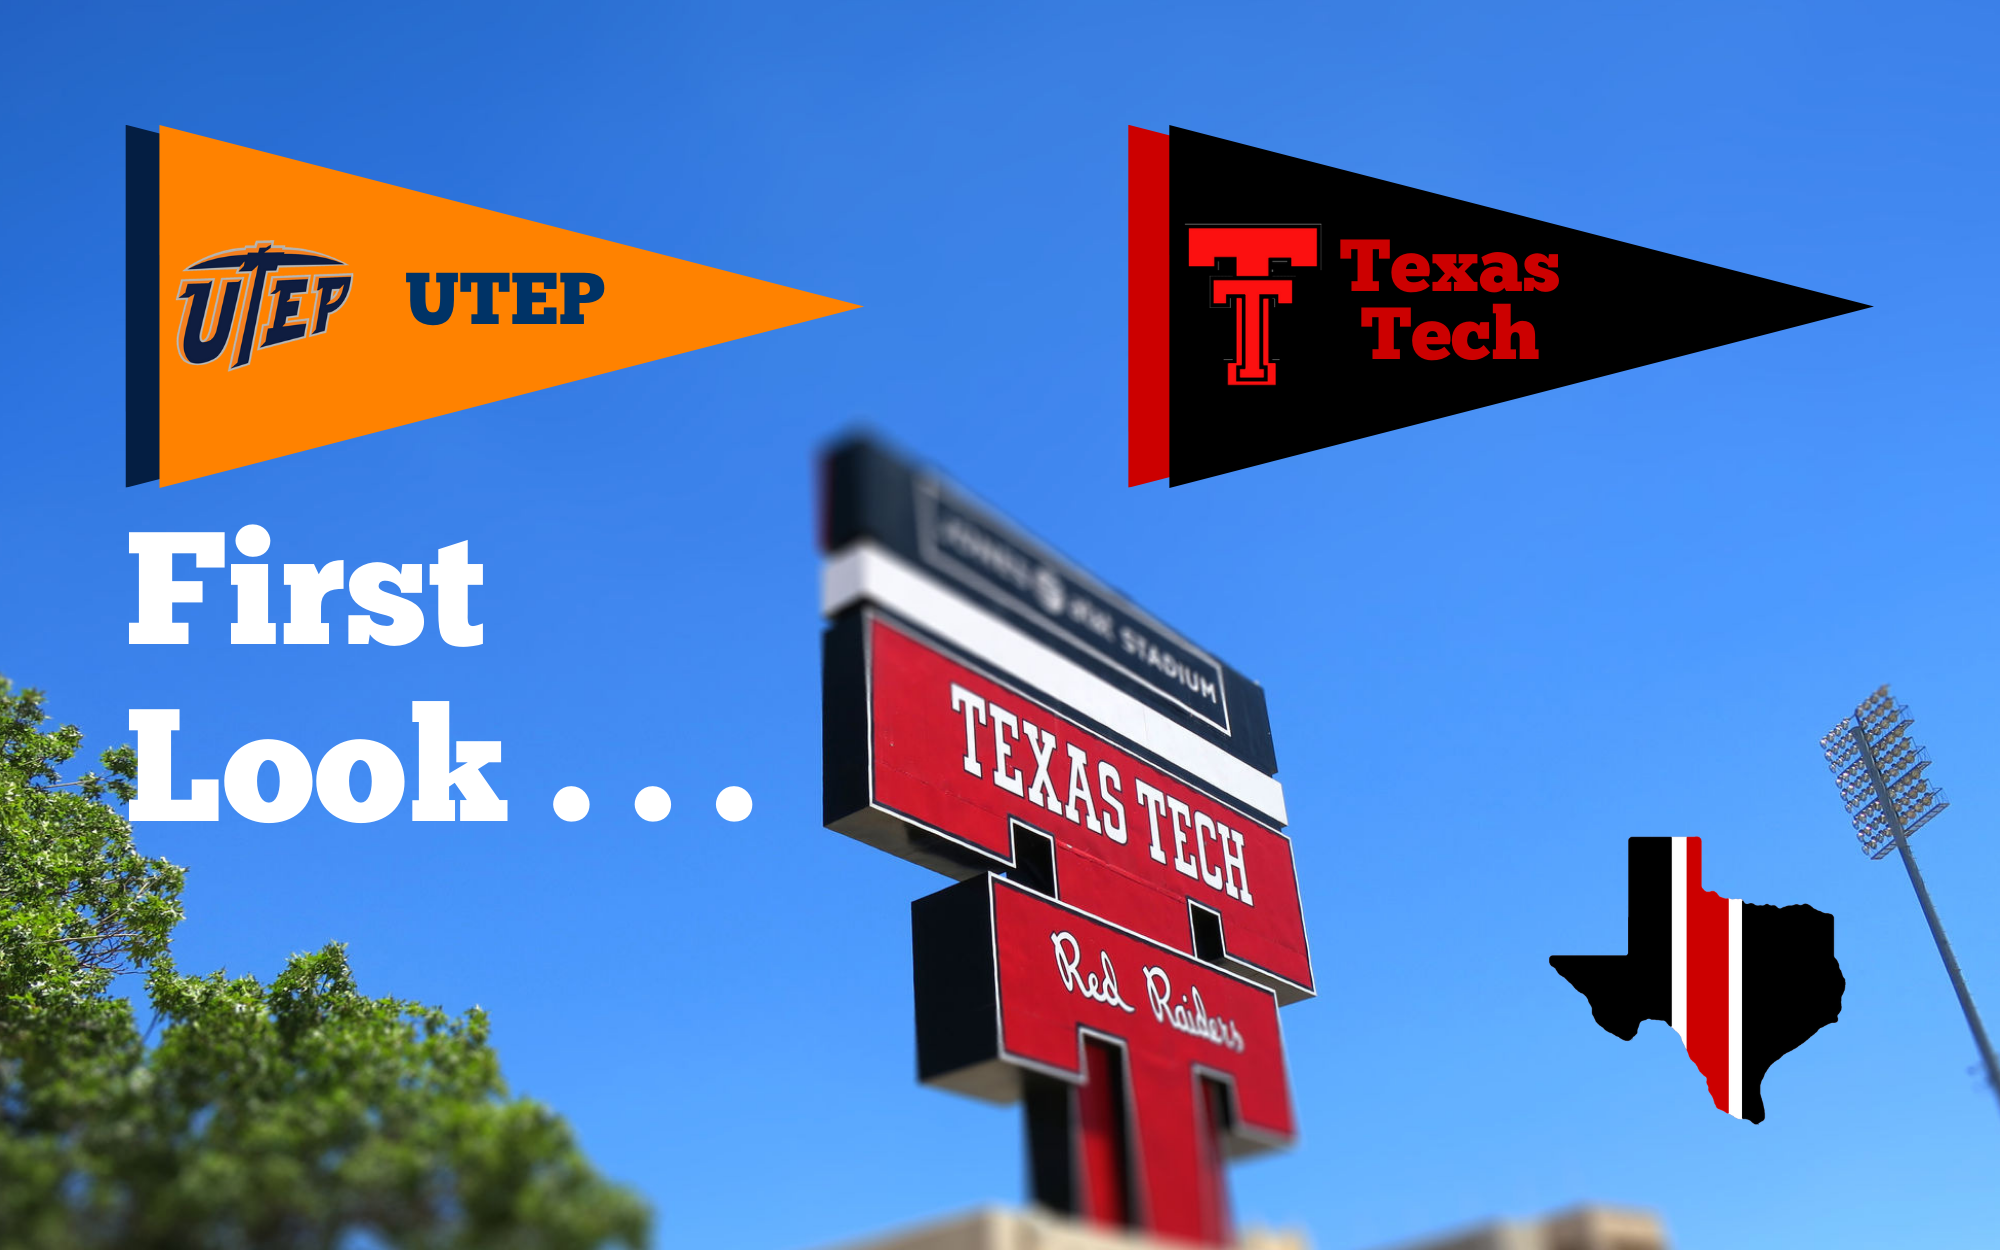 First Look . . . UTEP Miners vs. Texas Tech Red Raiders